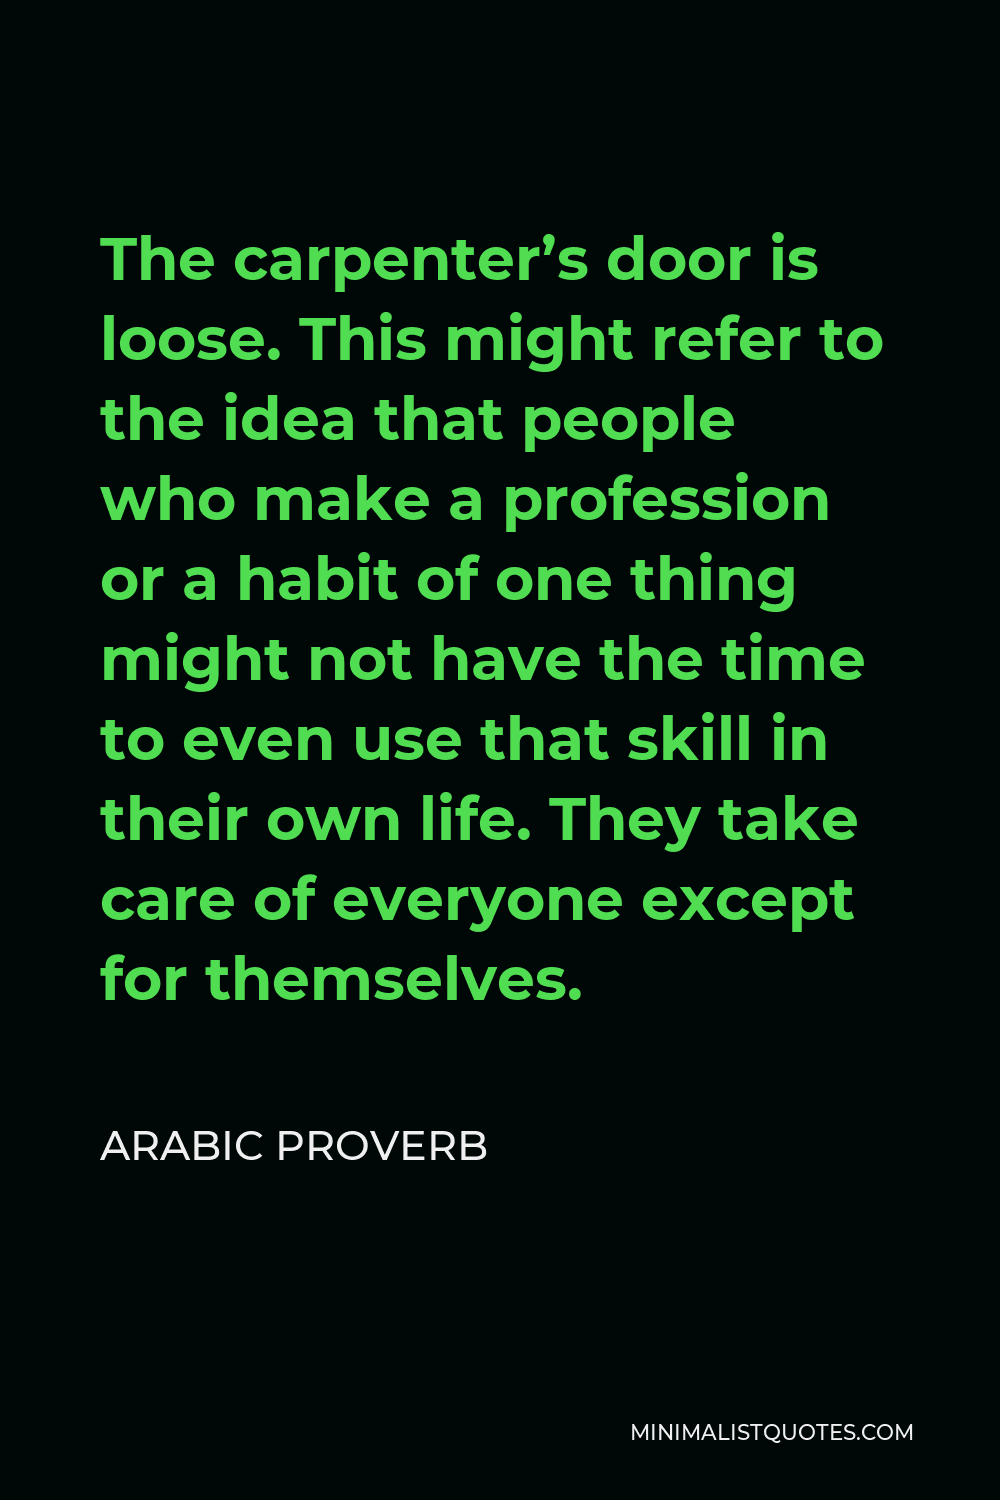 Arabic Proverb Quote - The carpenter’s door is loose. This might refer to the idea that people who make a profession or a habit of one thing might not have the time to even use that skill in their own life. They take care of everyone except for themselves.